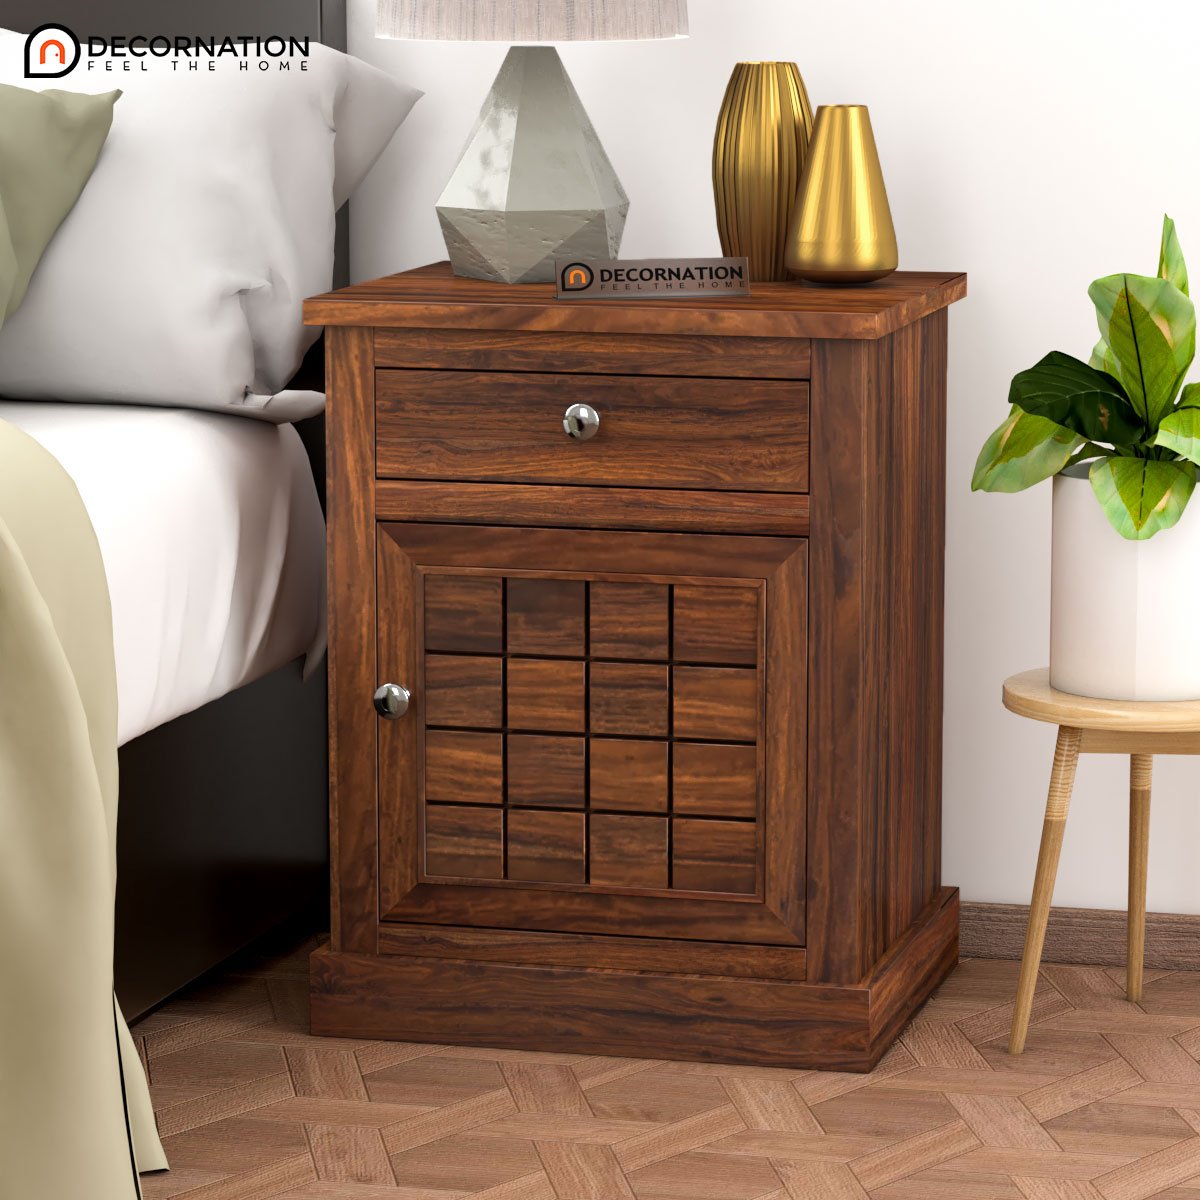 Irene Wooden Bedside Table With Storage – Natural Finish